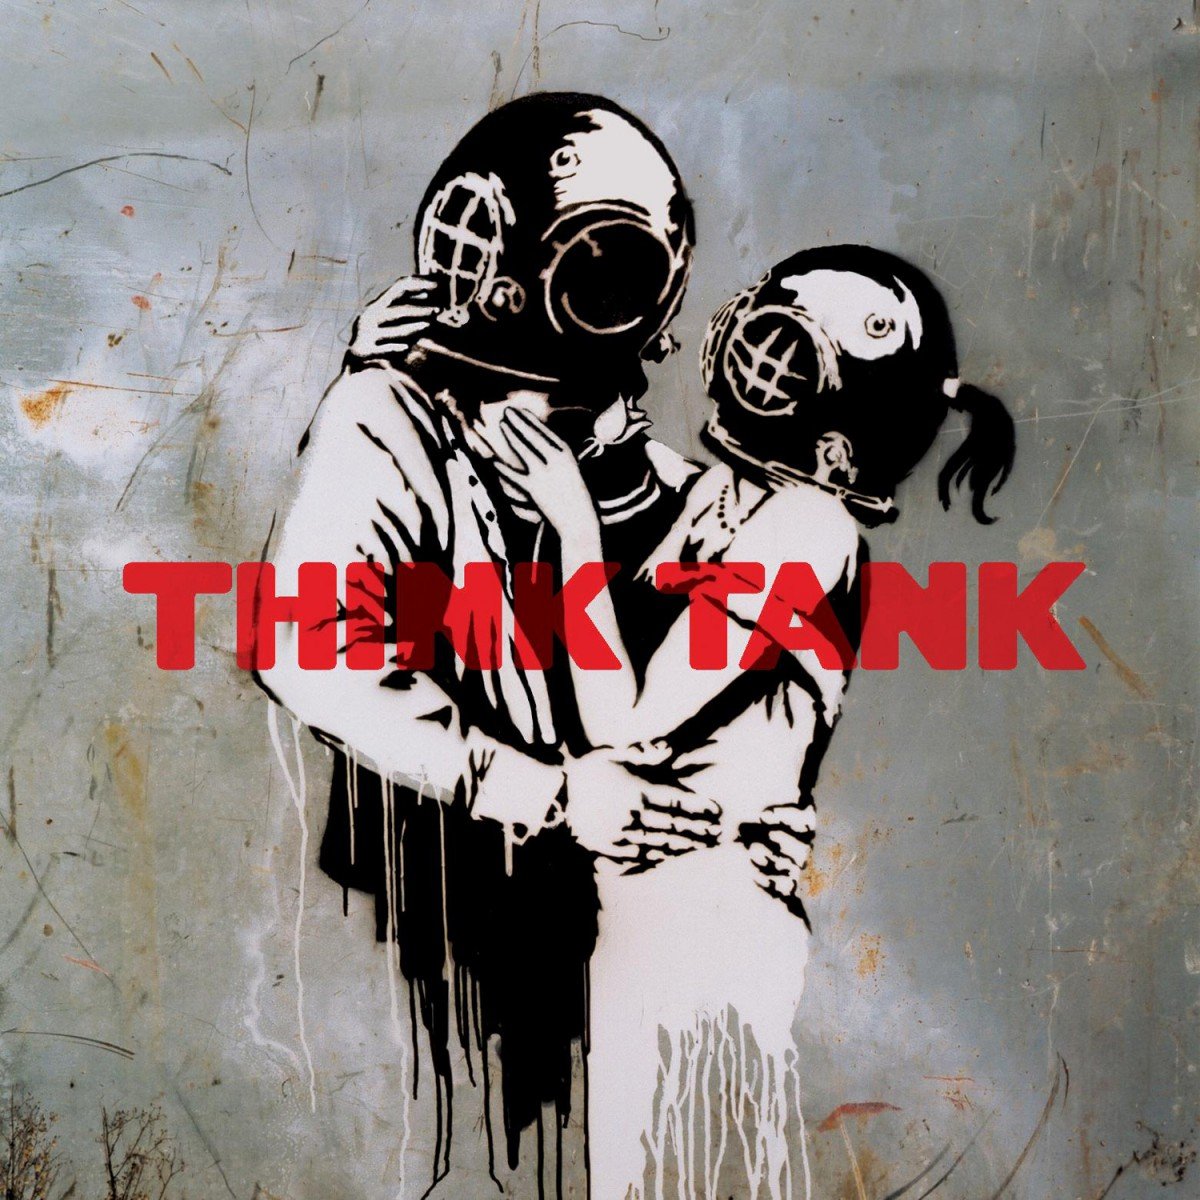 Blur's "Think Tank" with cover art by Banksy.